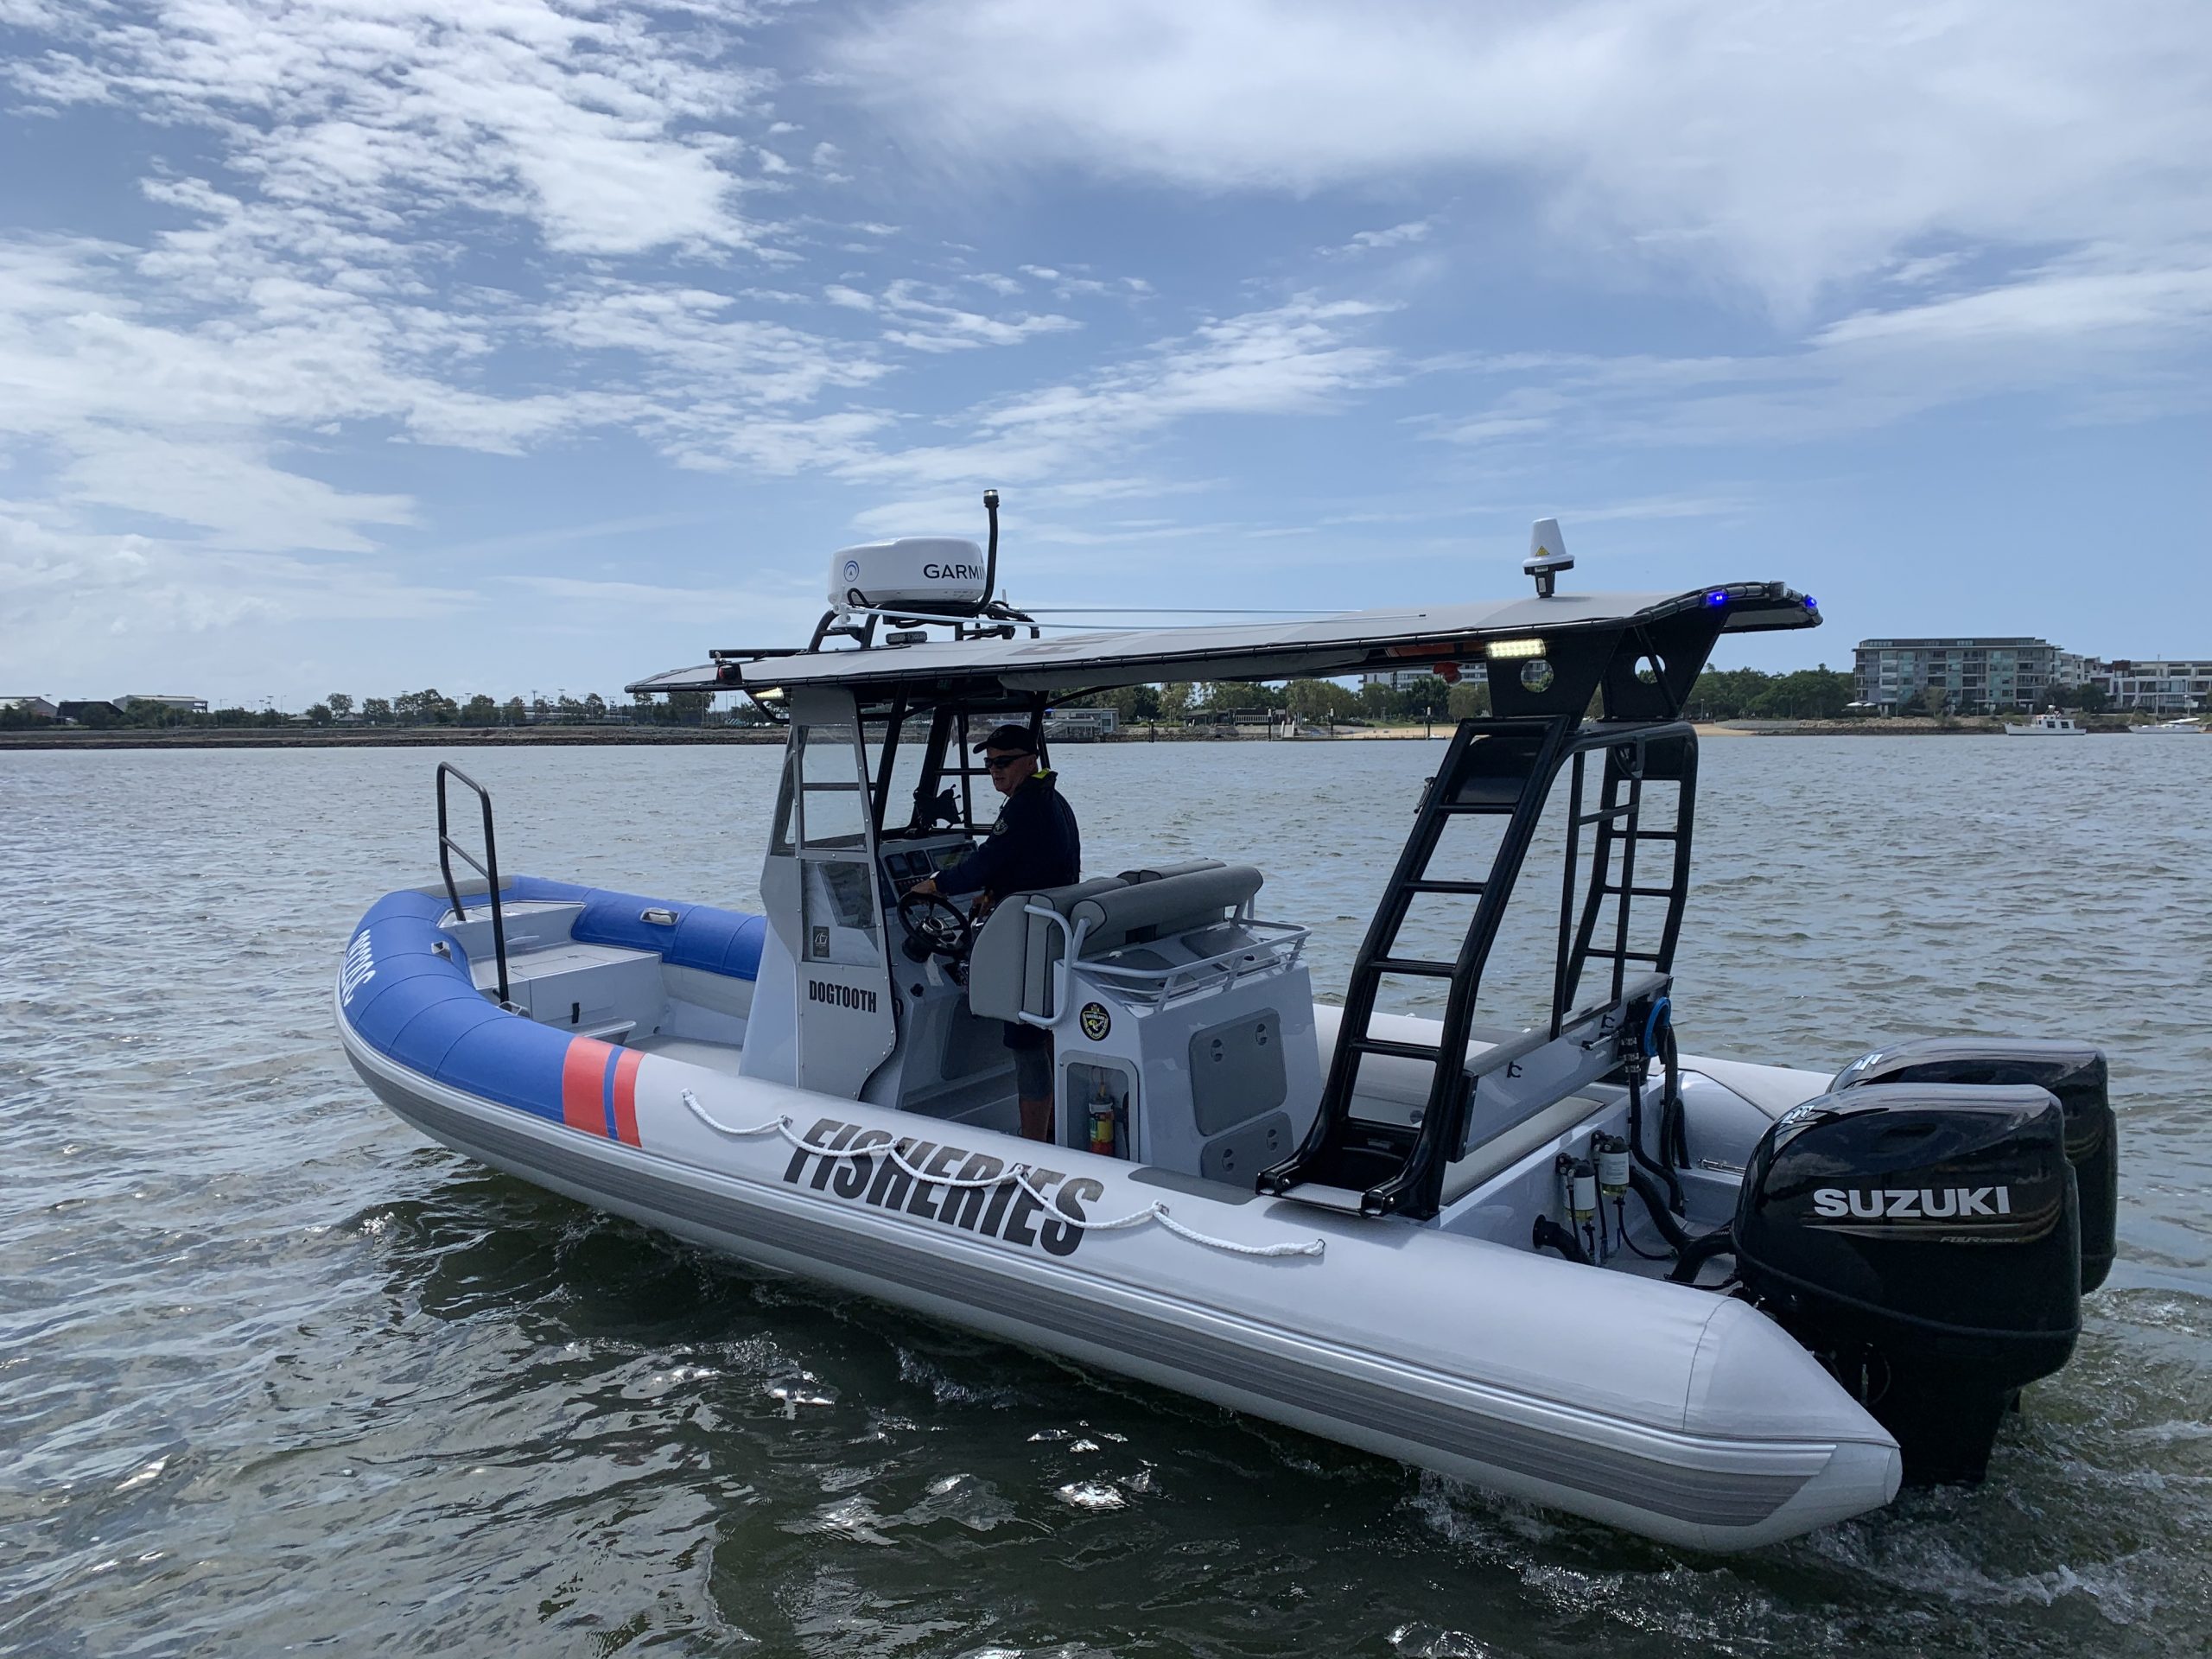 Queensland fisheries rhib after refit by aus ships boat builders